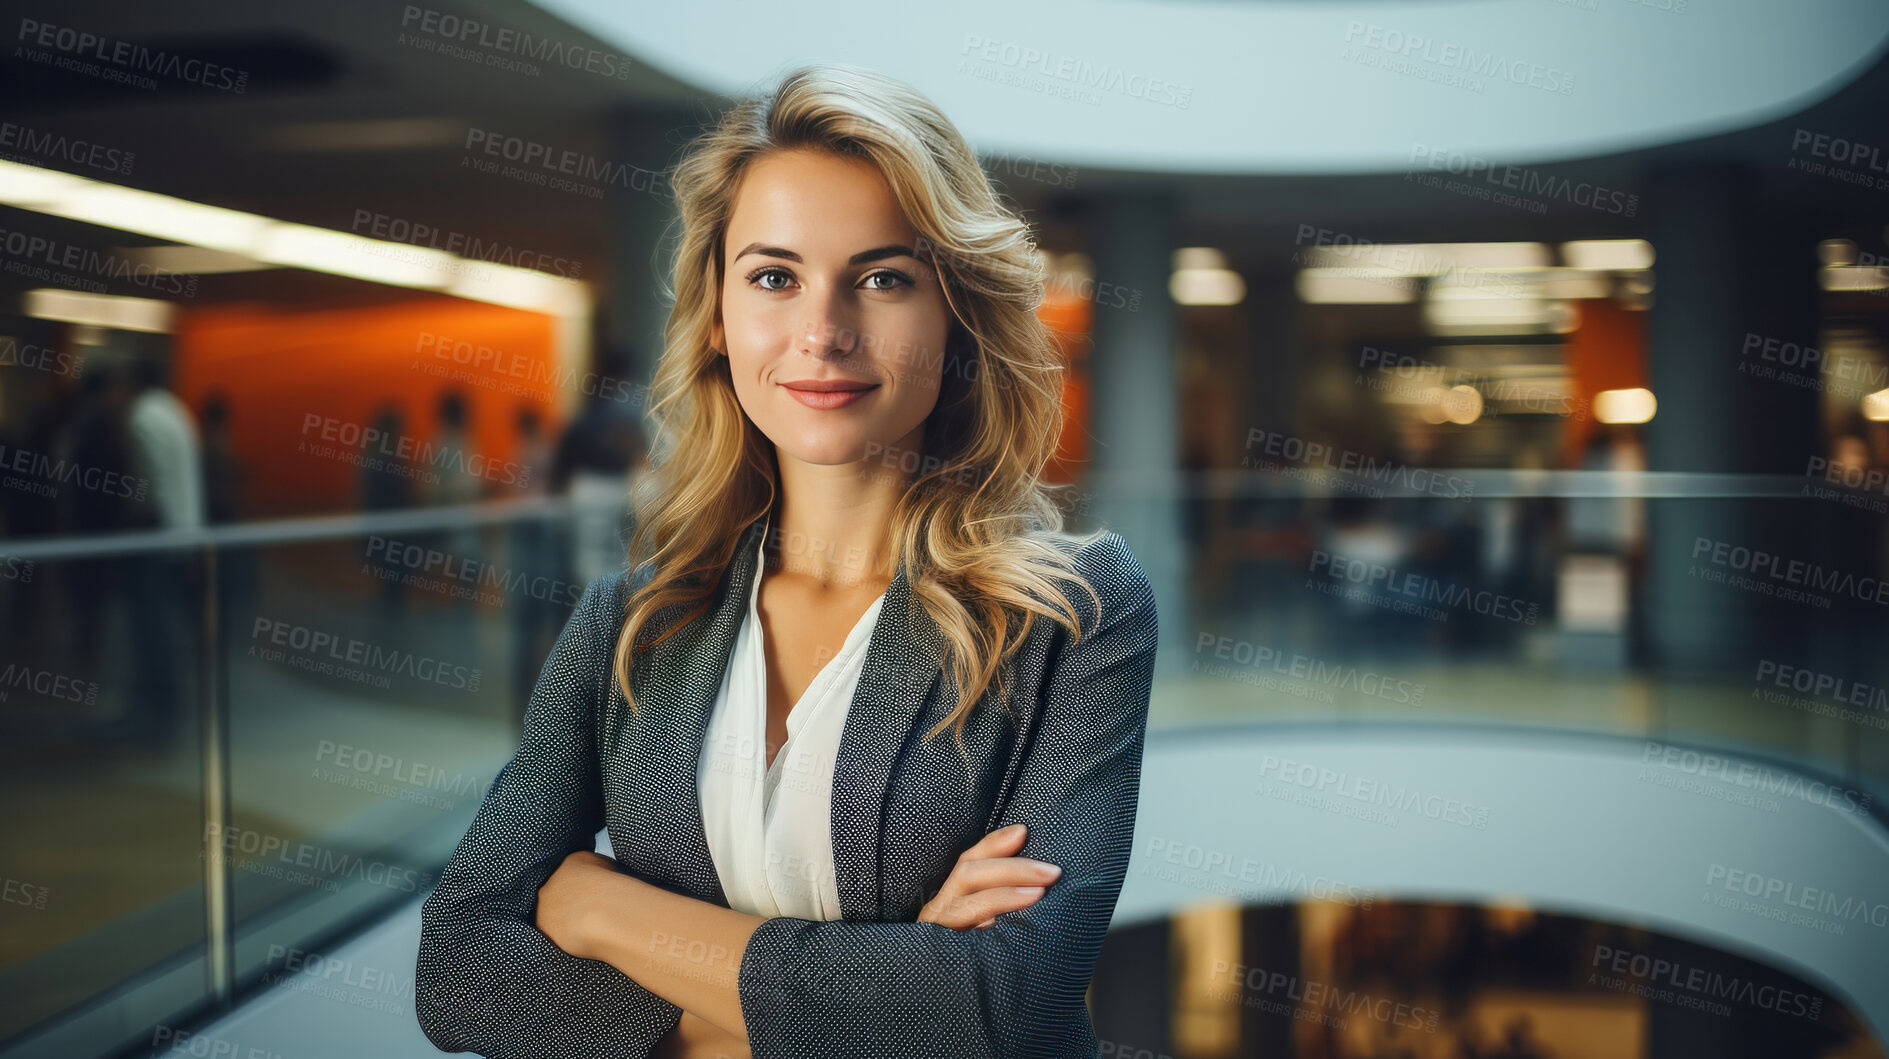 Buy stock photo Modern business professional posing in office building. Business concept.